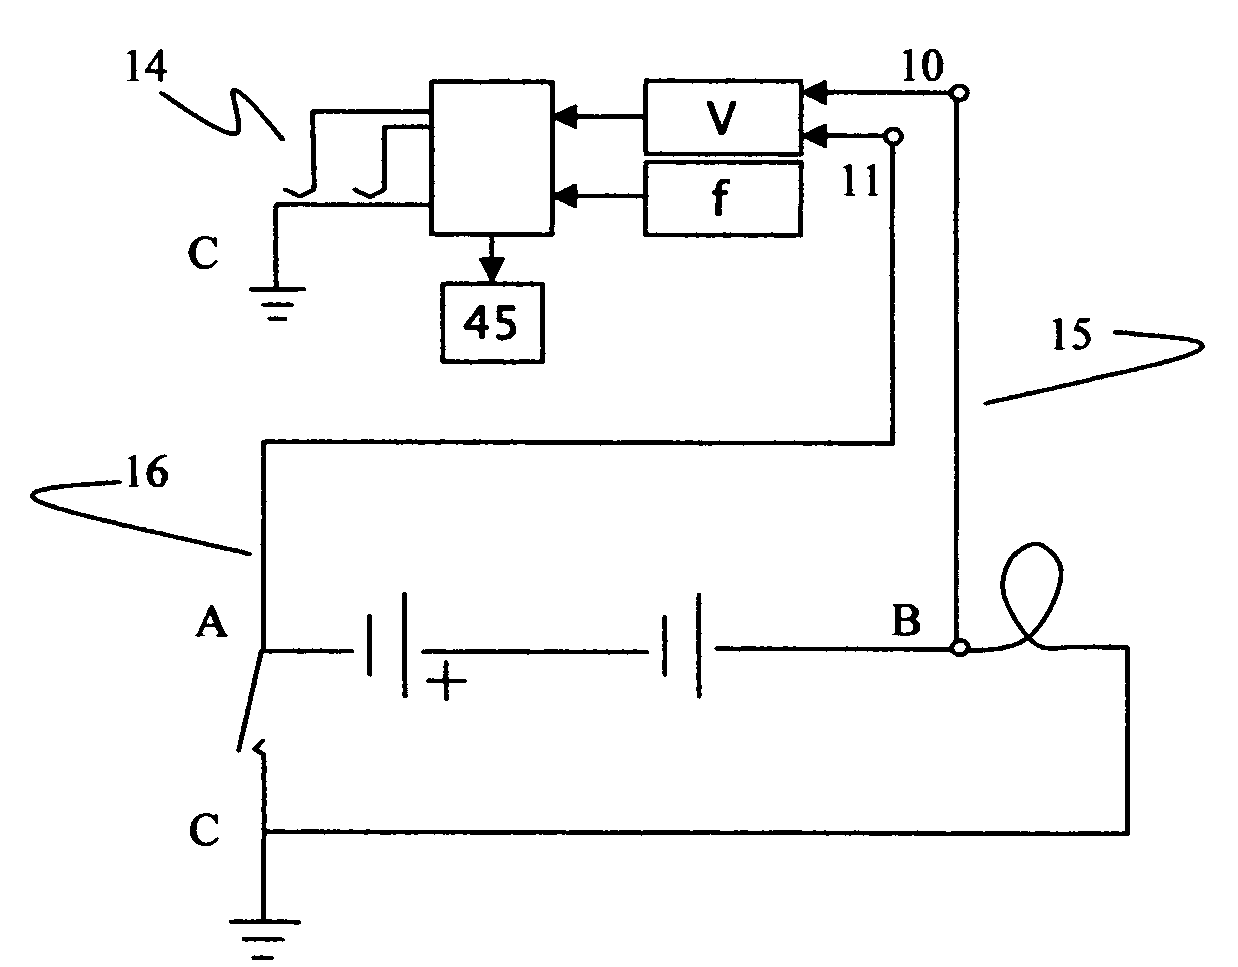 Battery operated device with a battery life indicator